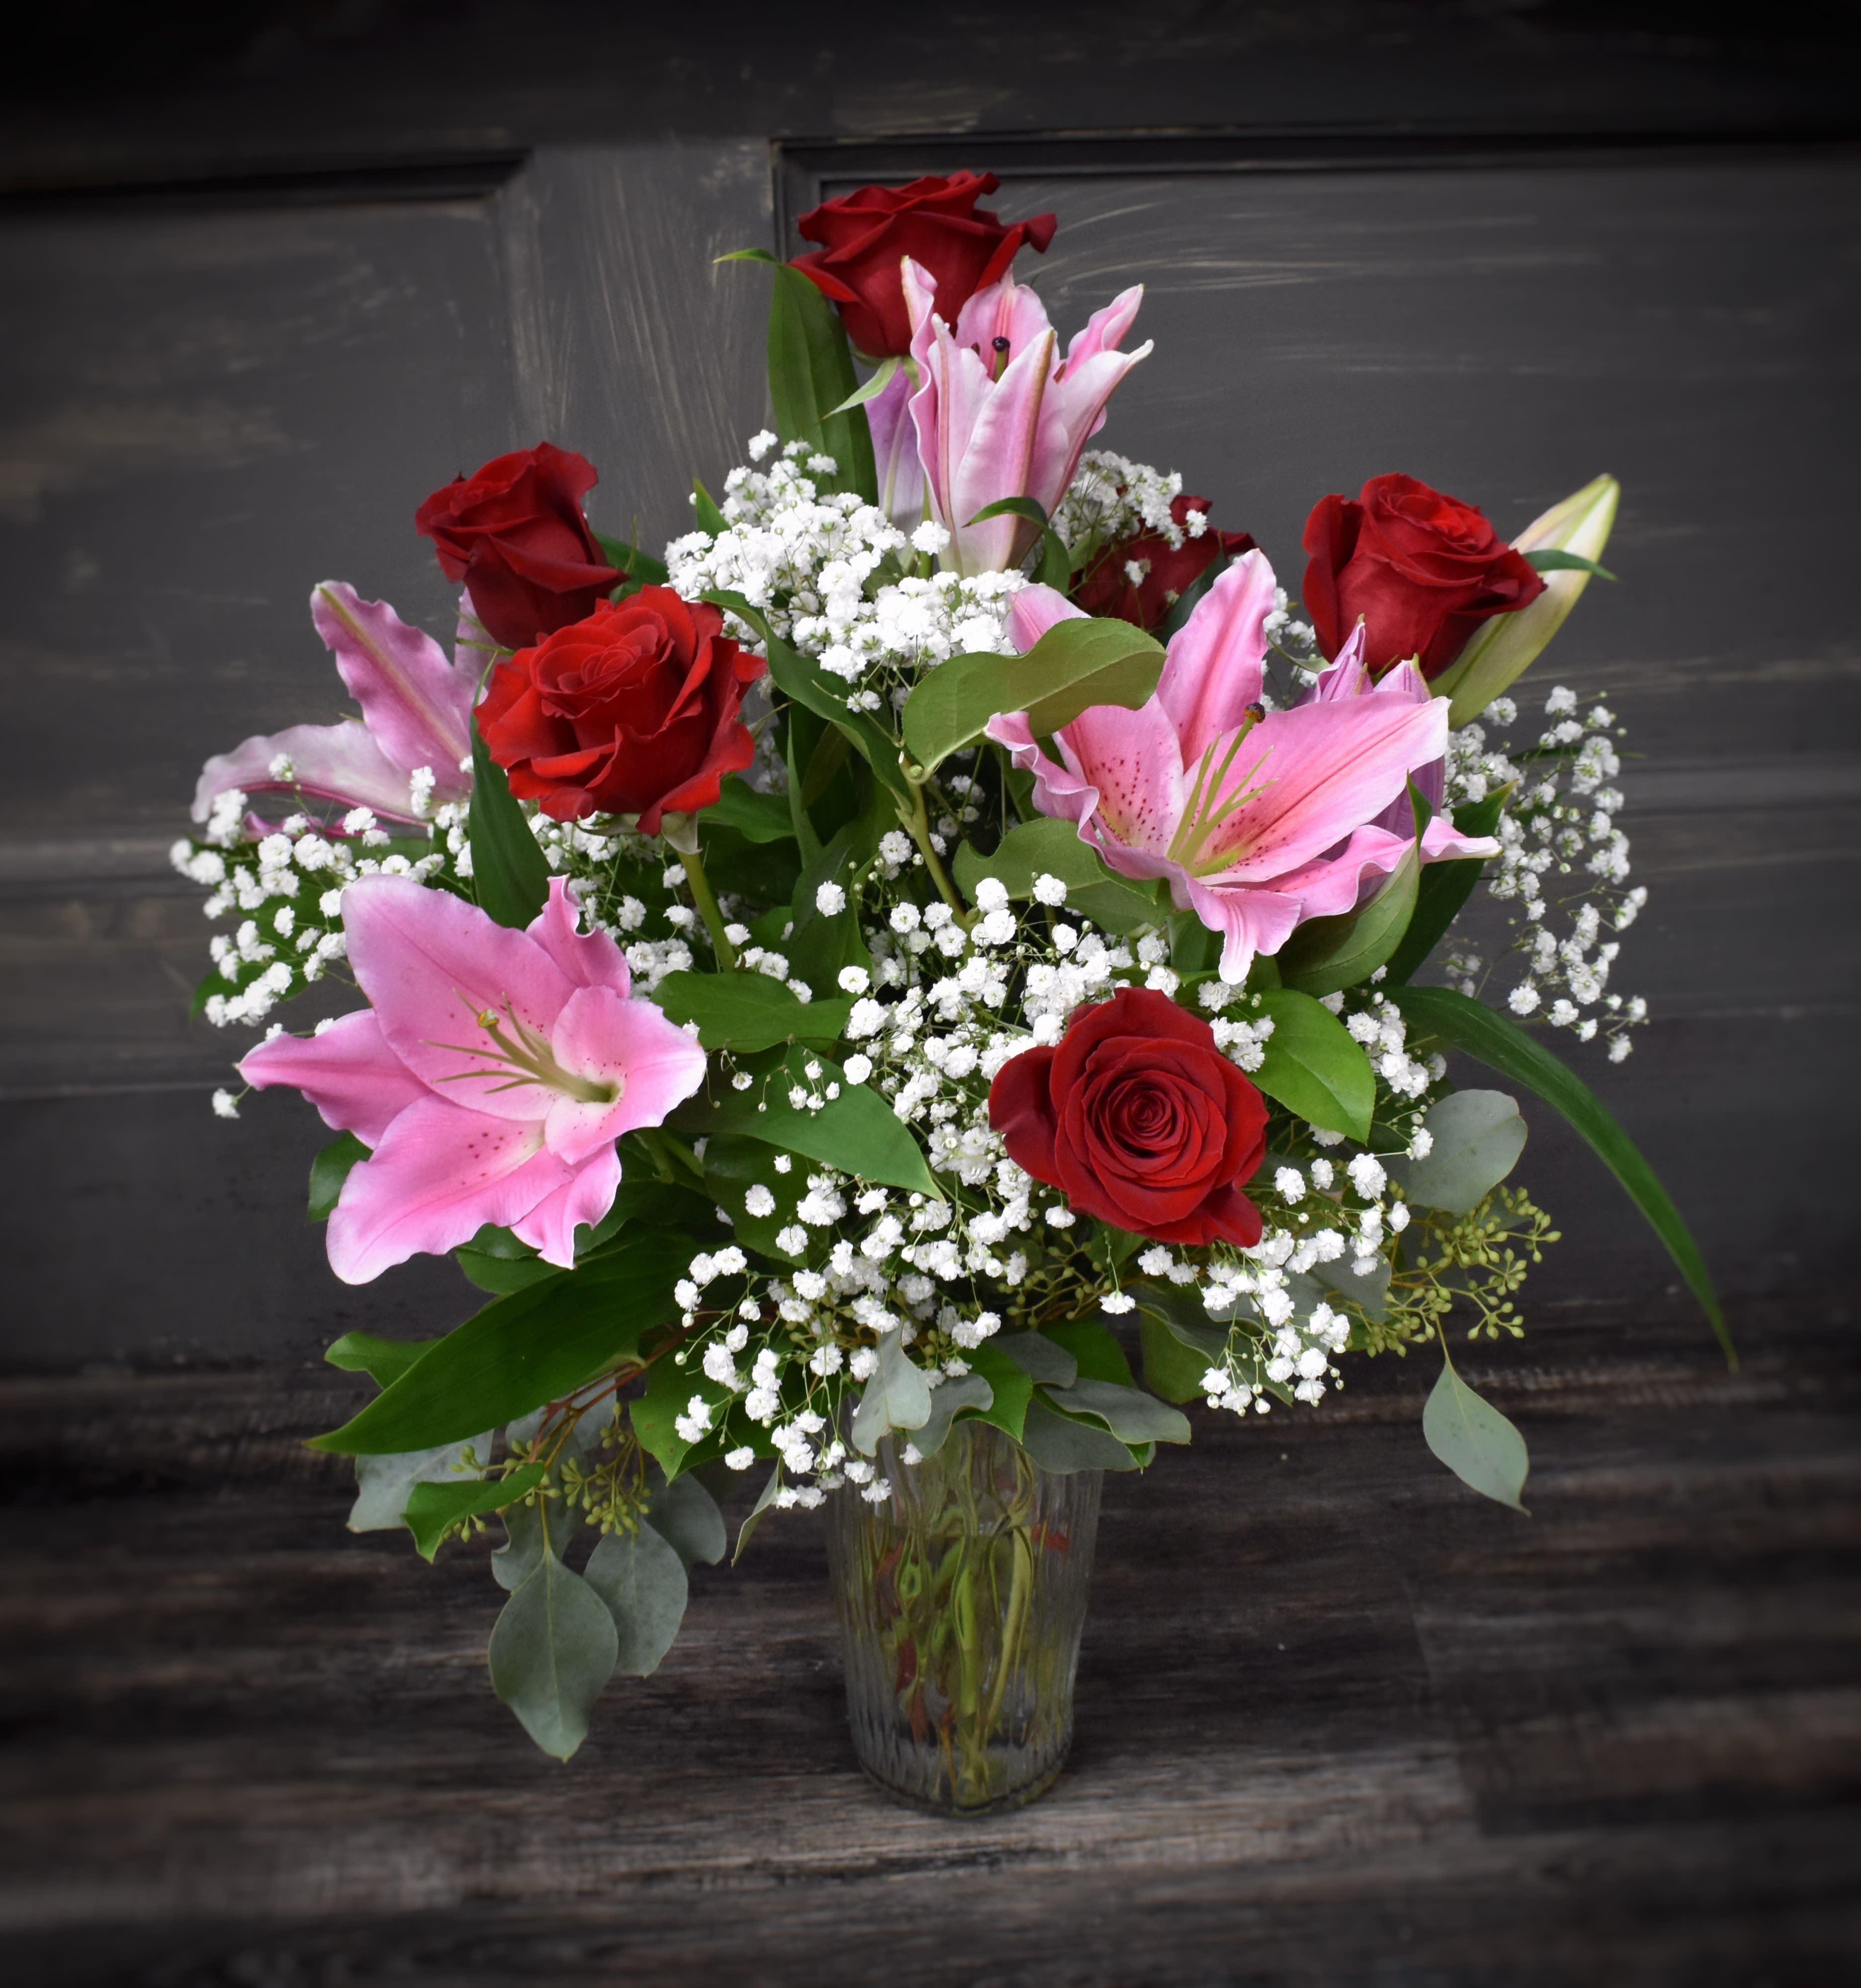 Roses and Lilies - Available for local St Cloud area delivery - One of our most popular designs, this bouquet is designed in a glass vase with 6 long stemmed roses, 3 stems of oriental lilies, assorted green foliages and babies breath as an accent flower. 